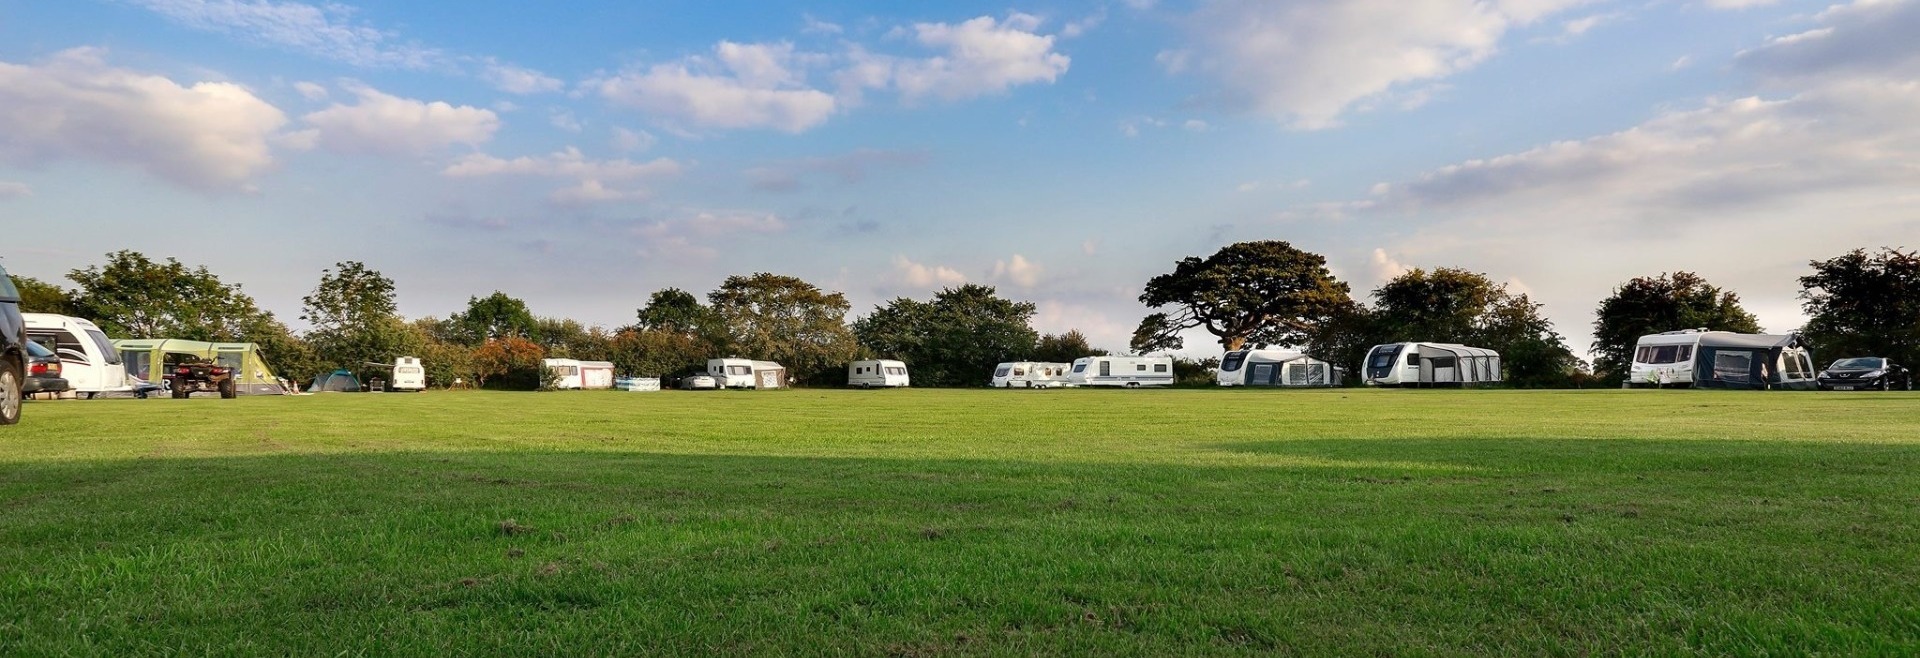 Westgate Farm Caravan Pitches with green grass and blue sky with fluffy white clouds